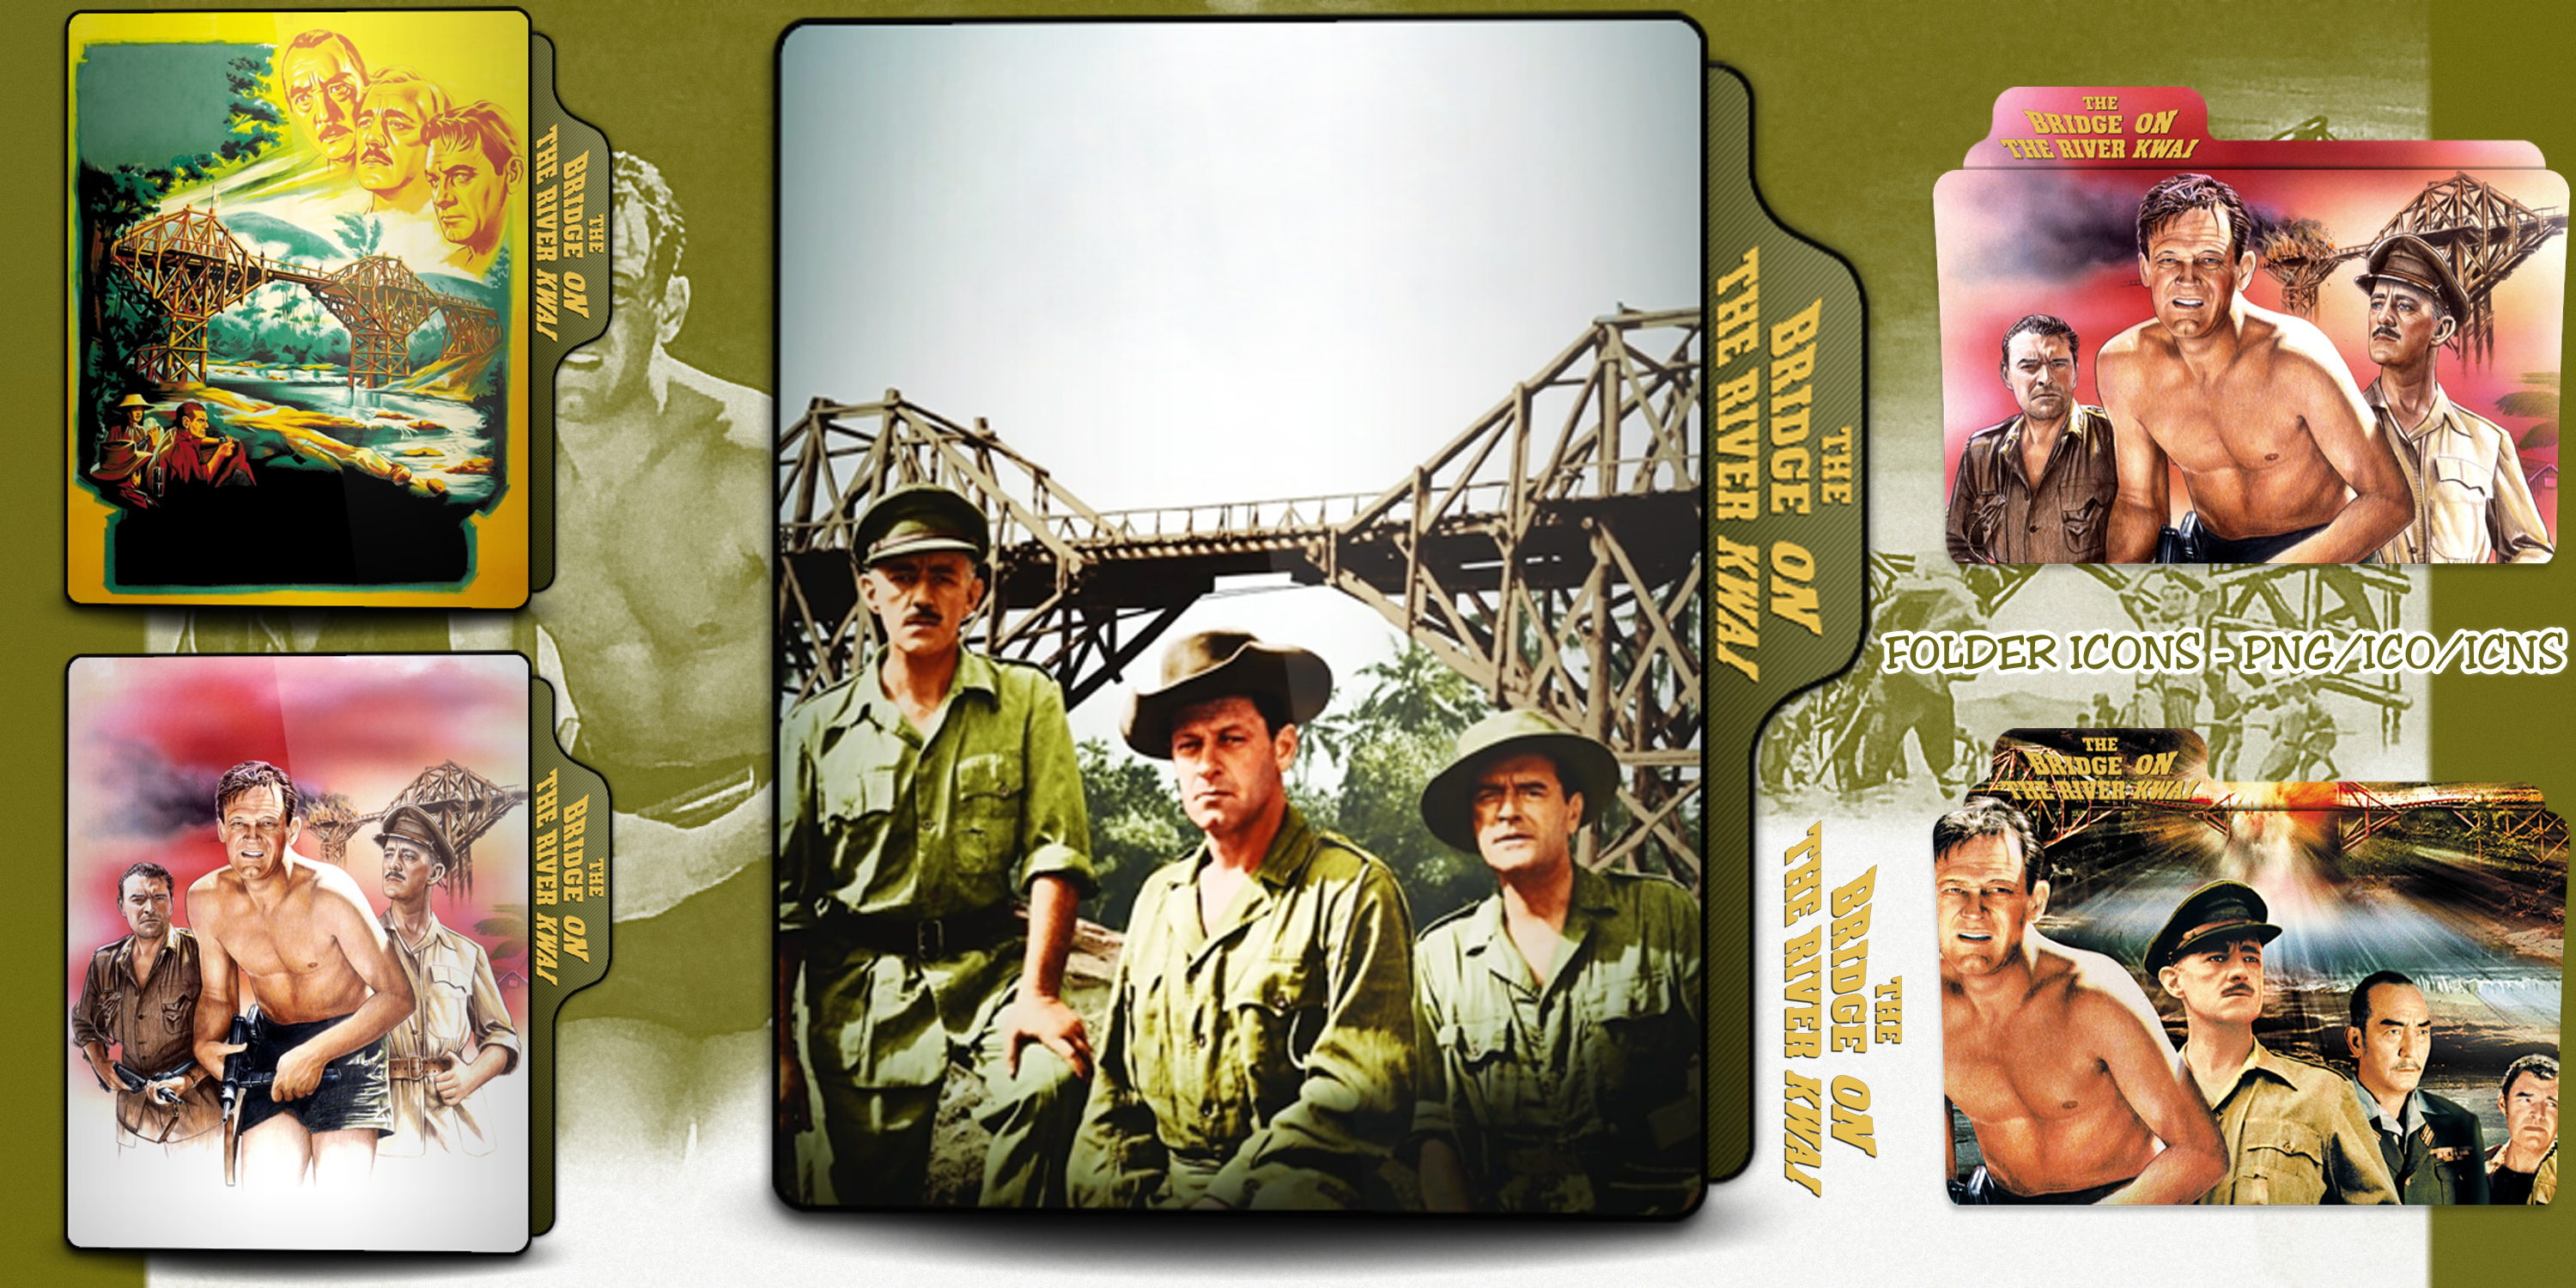 The Bridge on the River Kwai (1957) Technical Specifications